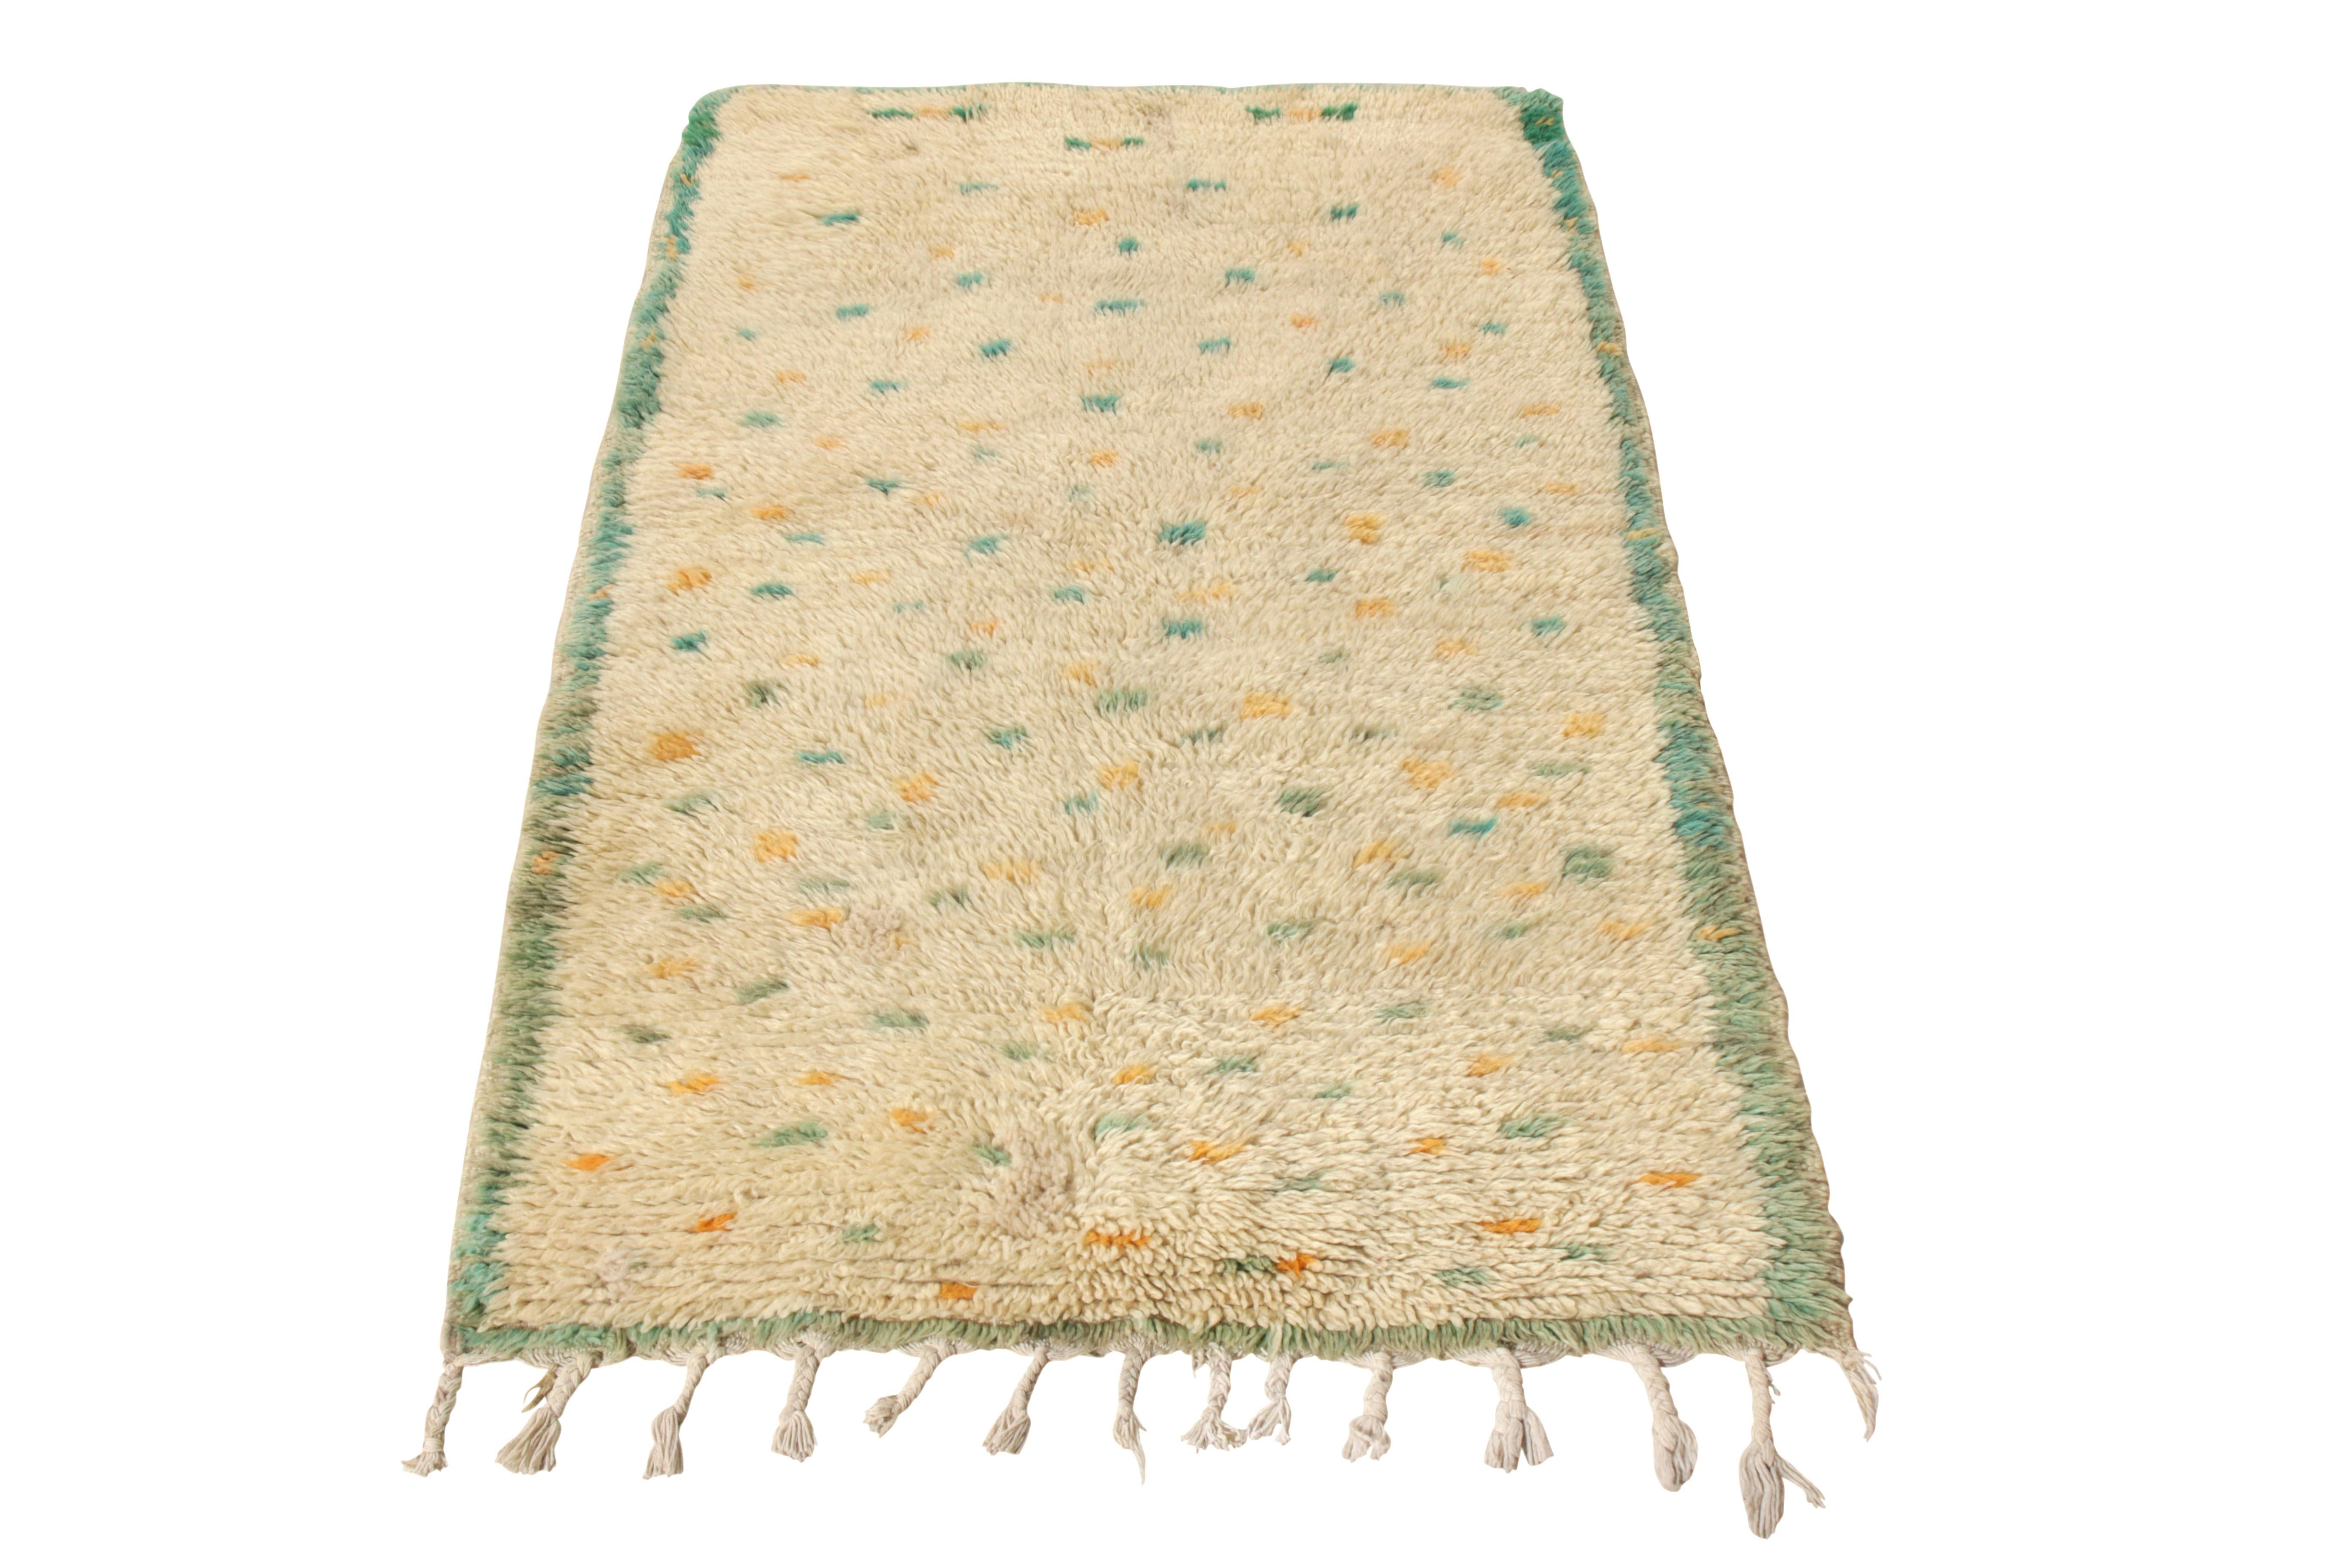 Hand knotted in Boucherouite wool, a vintage 3 x 5 Berber rug originating circa 1950-1960 joining Rug & Kilim’s Moroccan Collection. Prevailing in gorgeous tones of green and yellow against a creamy beige, this shag high pile witnesses a